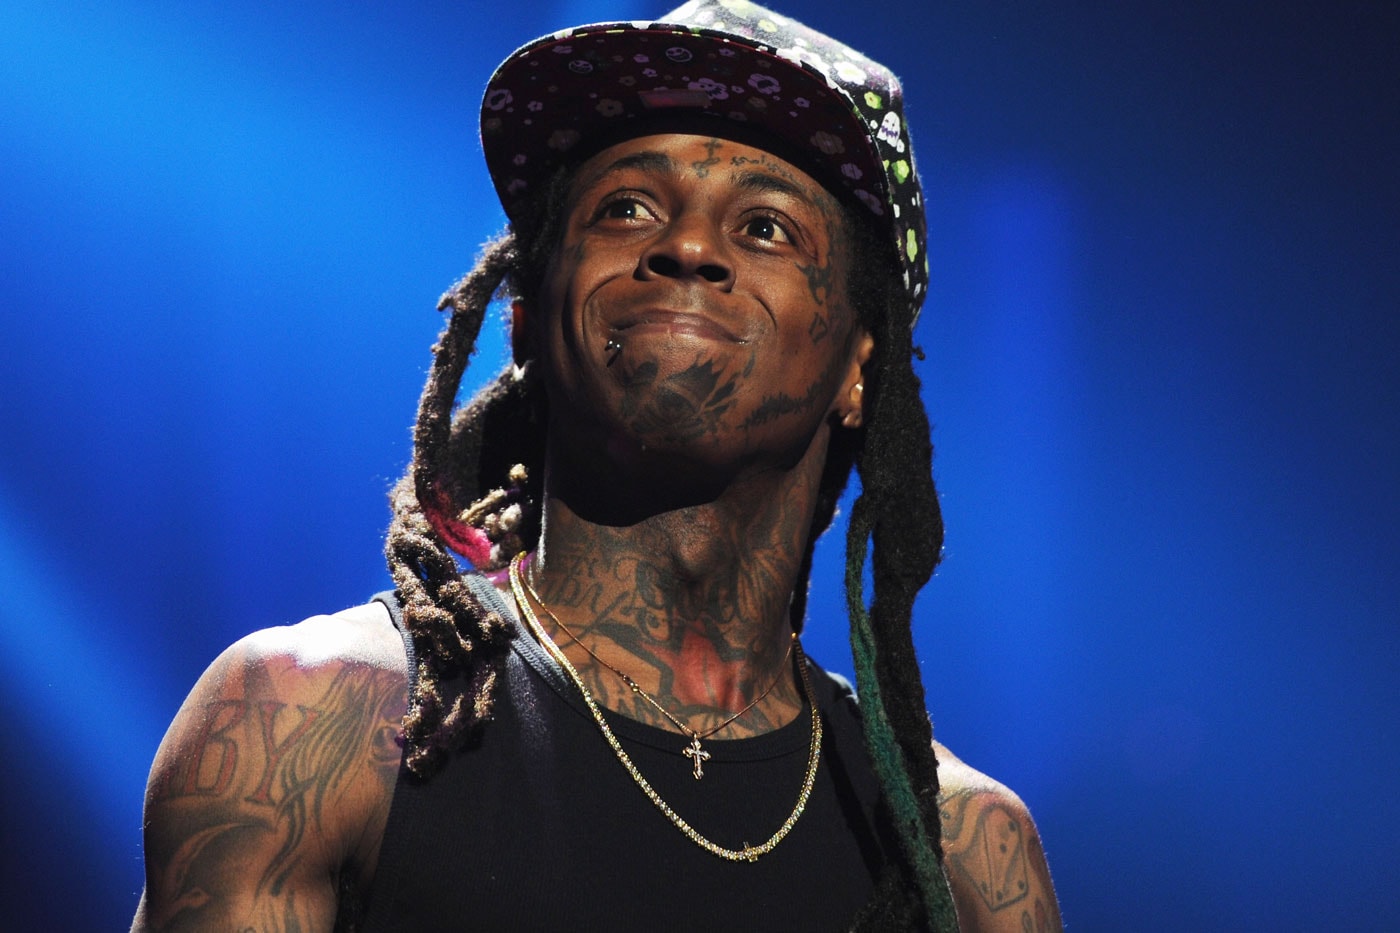 Is Birdman Looking To Make Peace With Lil Wayne In His Newest Instagram?